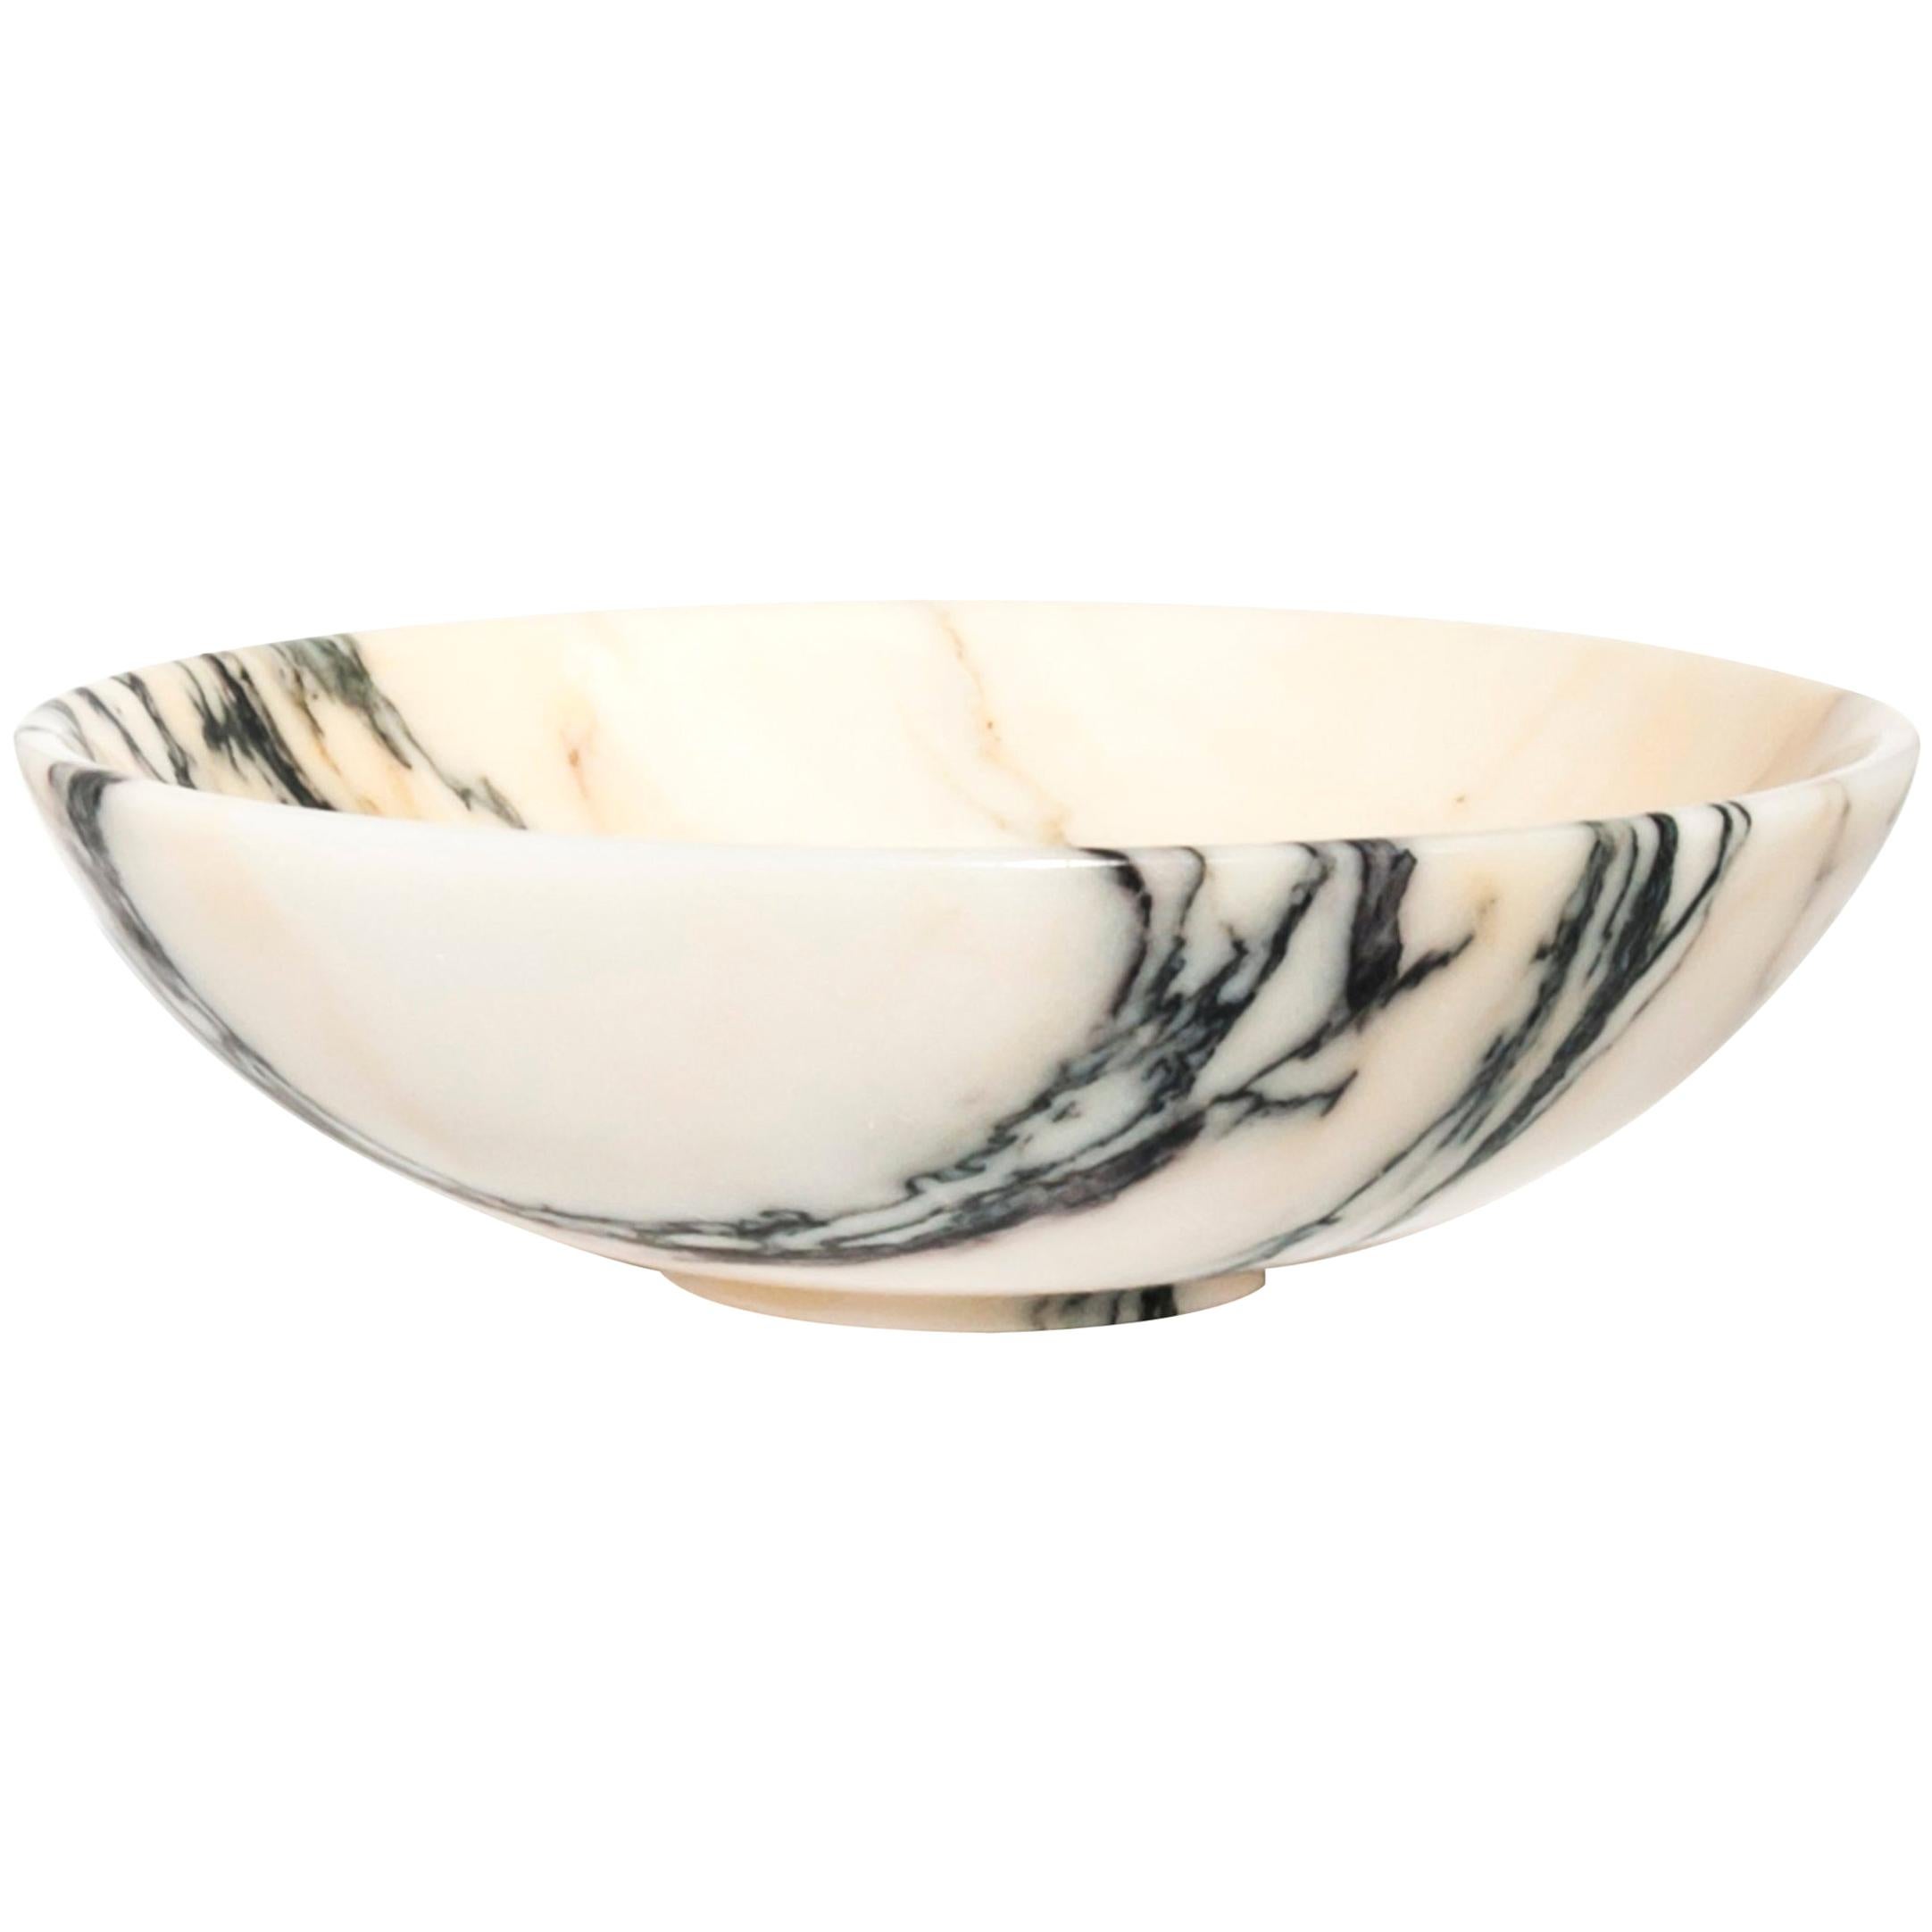 Handmade Small Fruit Bowl in Paonazzo Marble